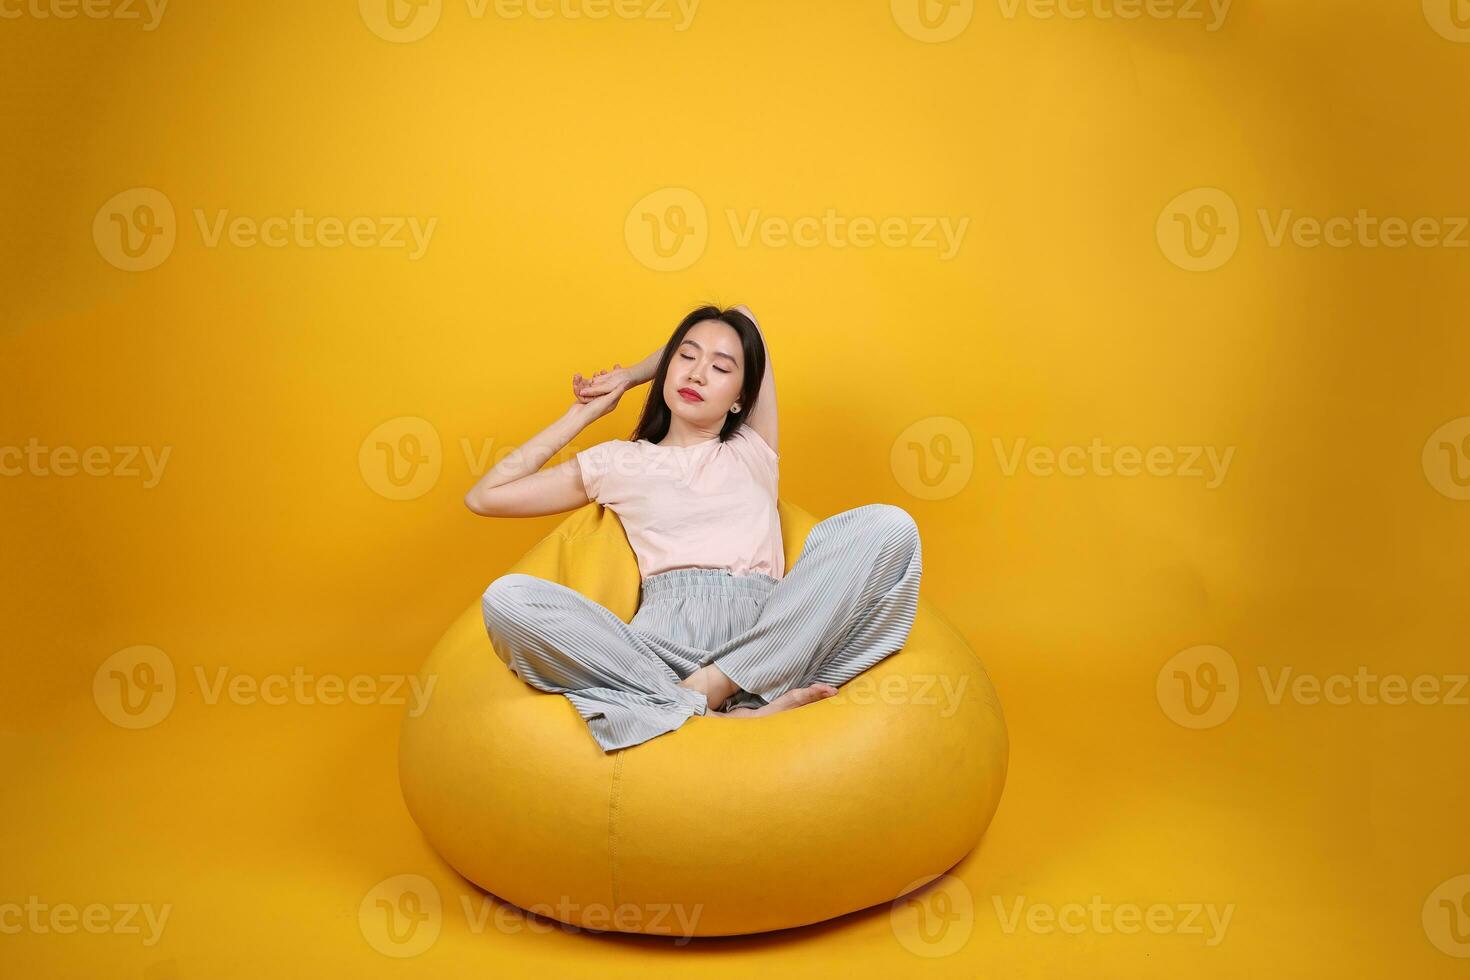 Beautiful young south east Asian woman sits on a yellow beanbag seat orange yellow color background pose fashion style elegant beauty mood expression rest relax exercise stretch yoga photo